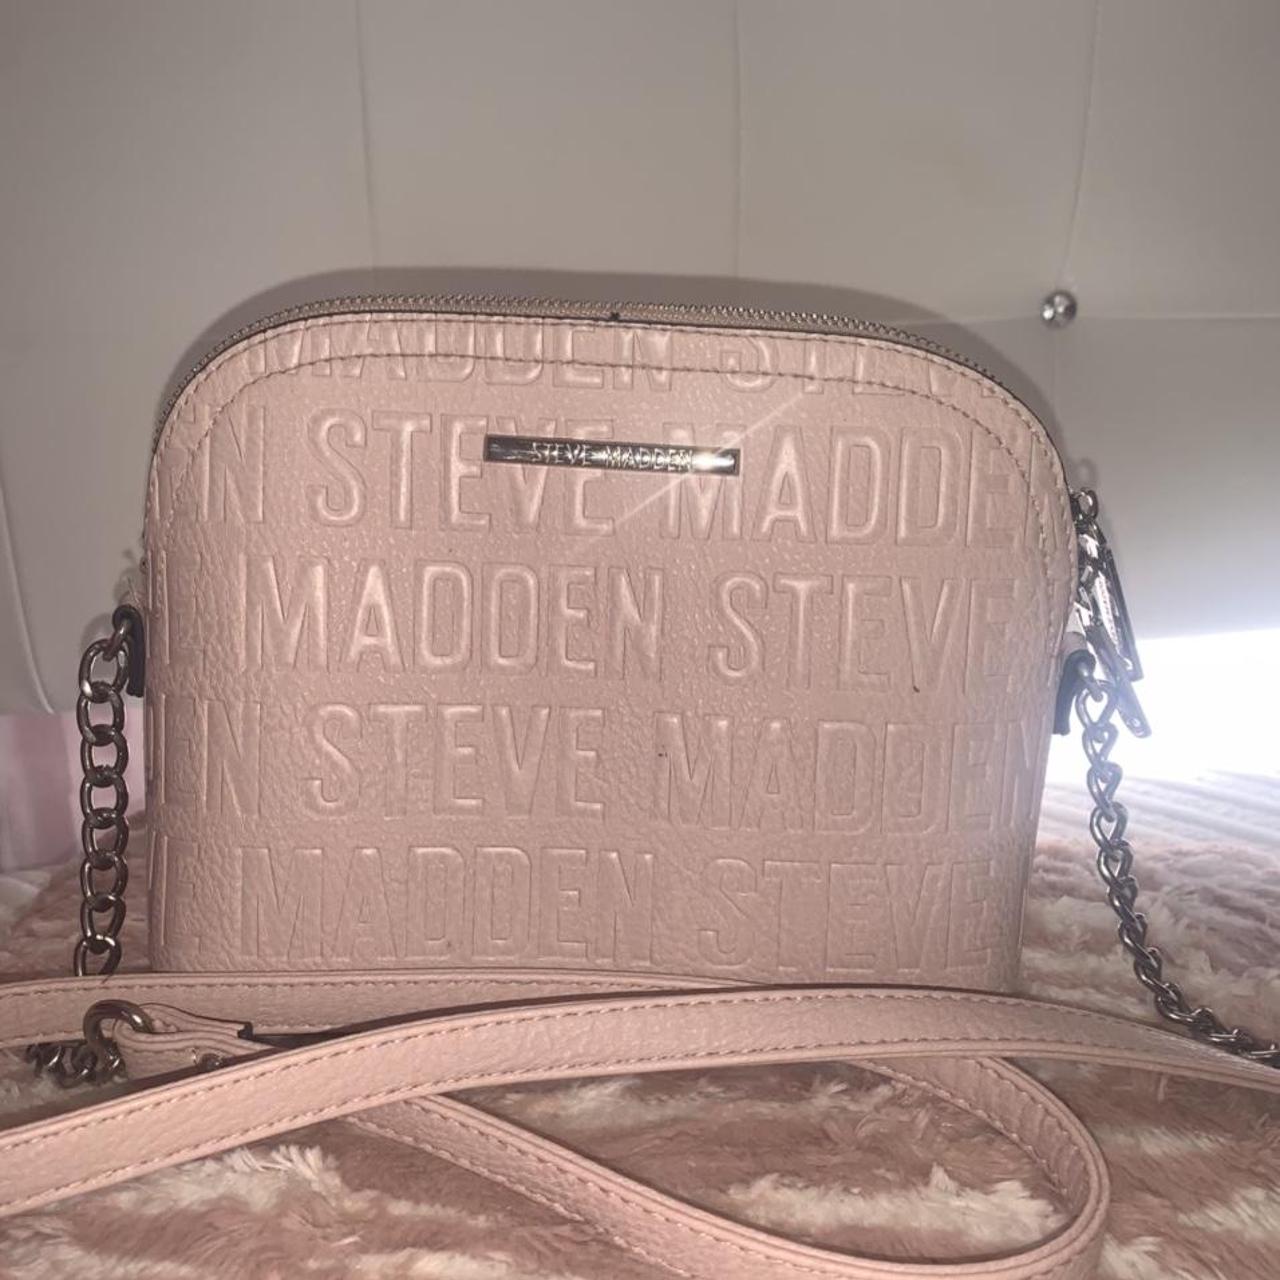 Steve Madden - Authenticated Handbag - Synthetic Pink Plain for Women, Very Good Condition